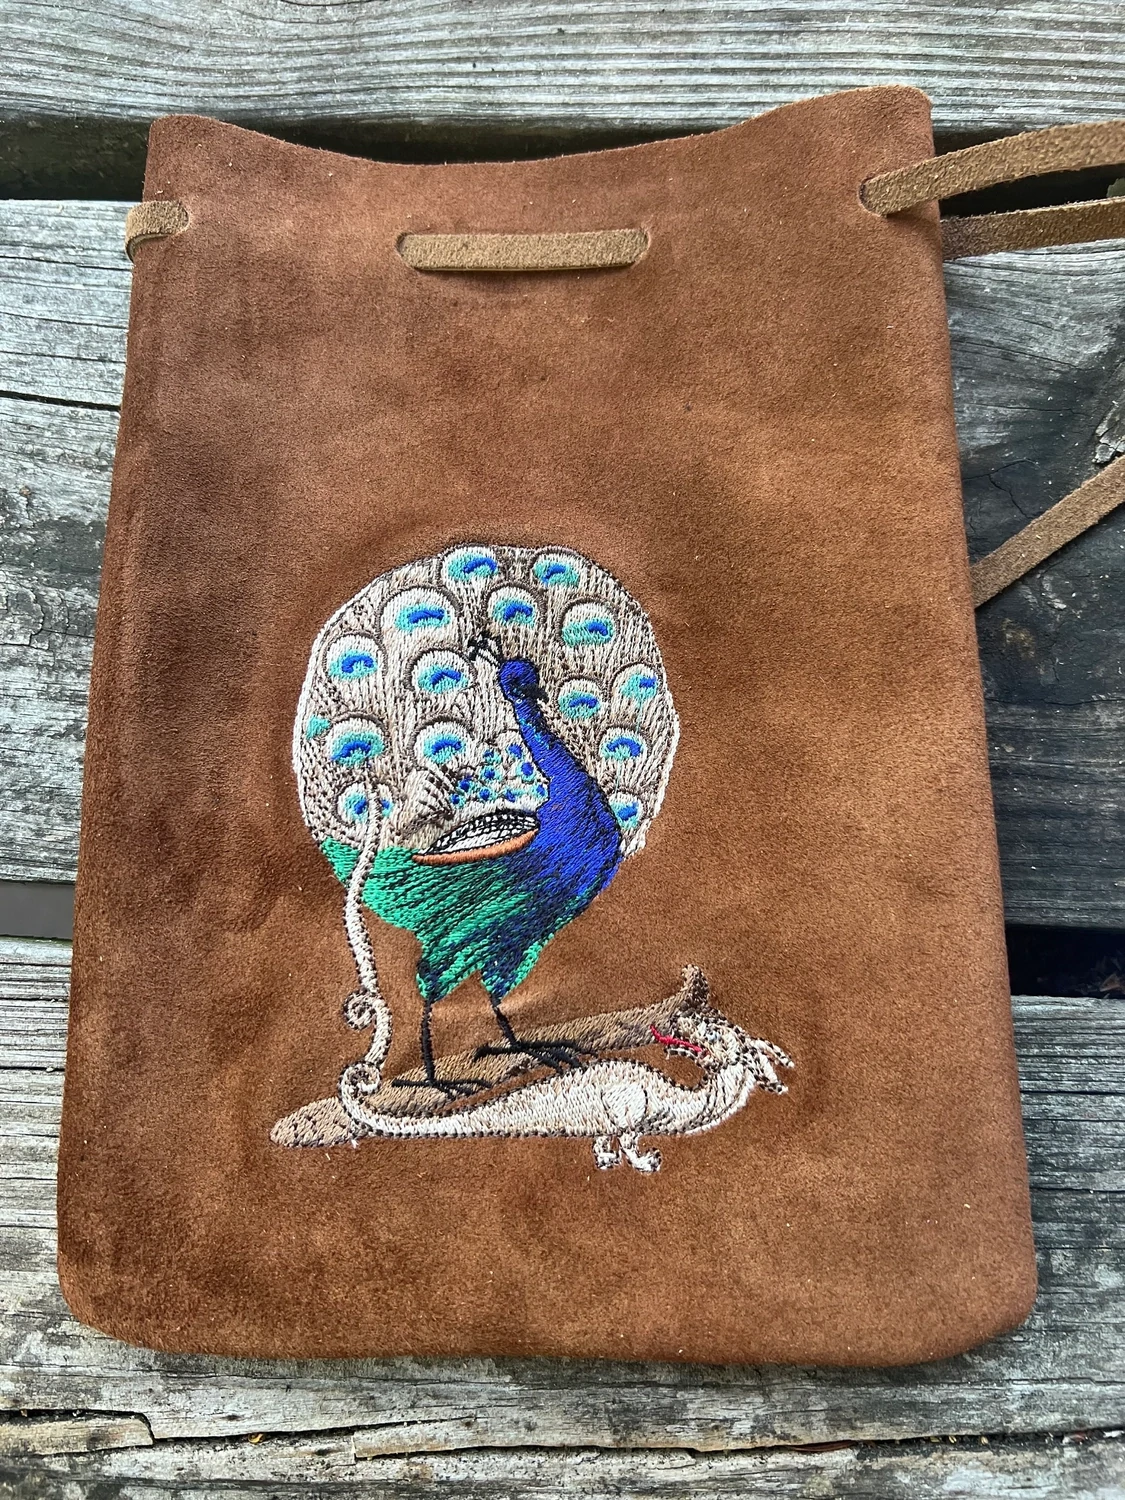 Suede Embroidered Suede Leather Bag 8.5x6 - Serpent and Peacock World Card